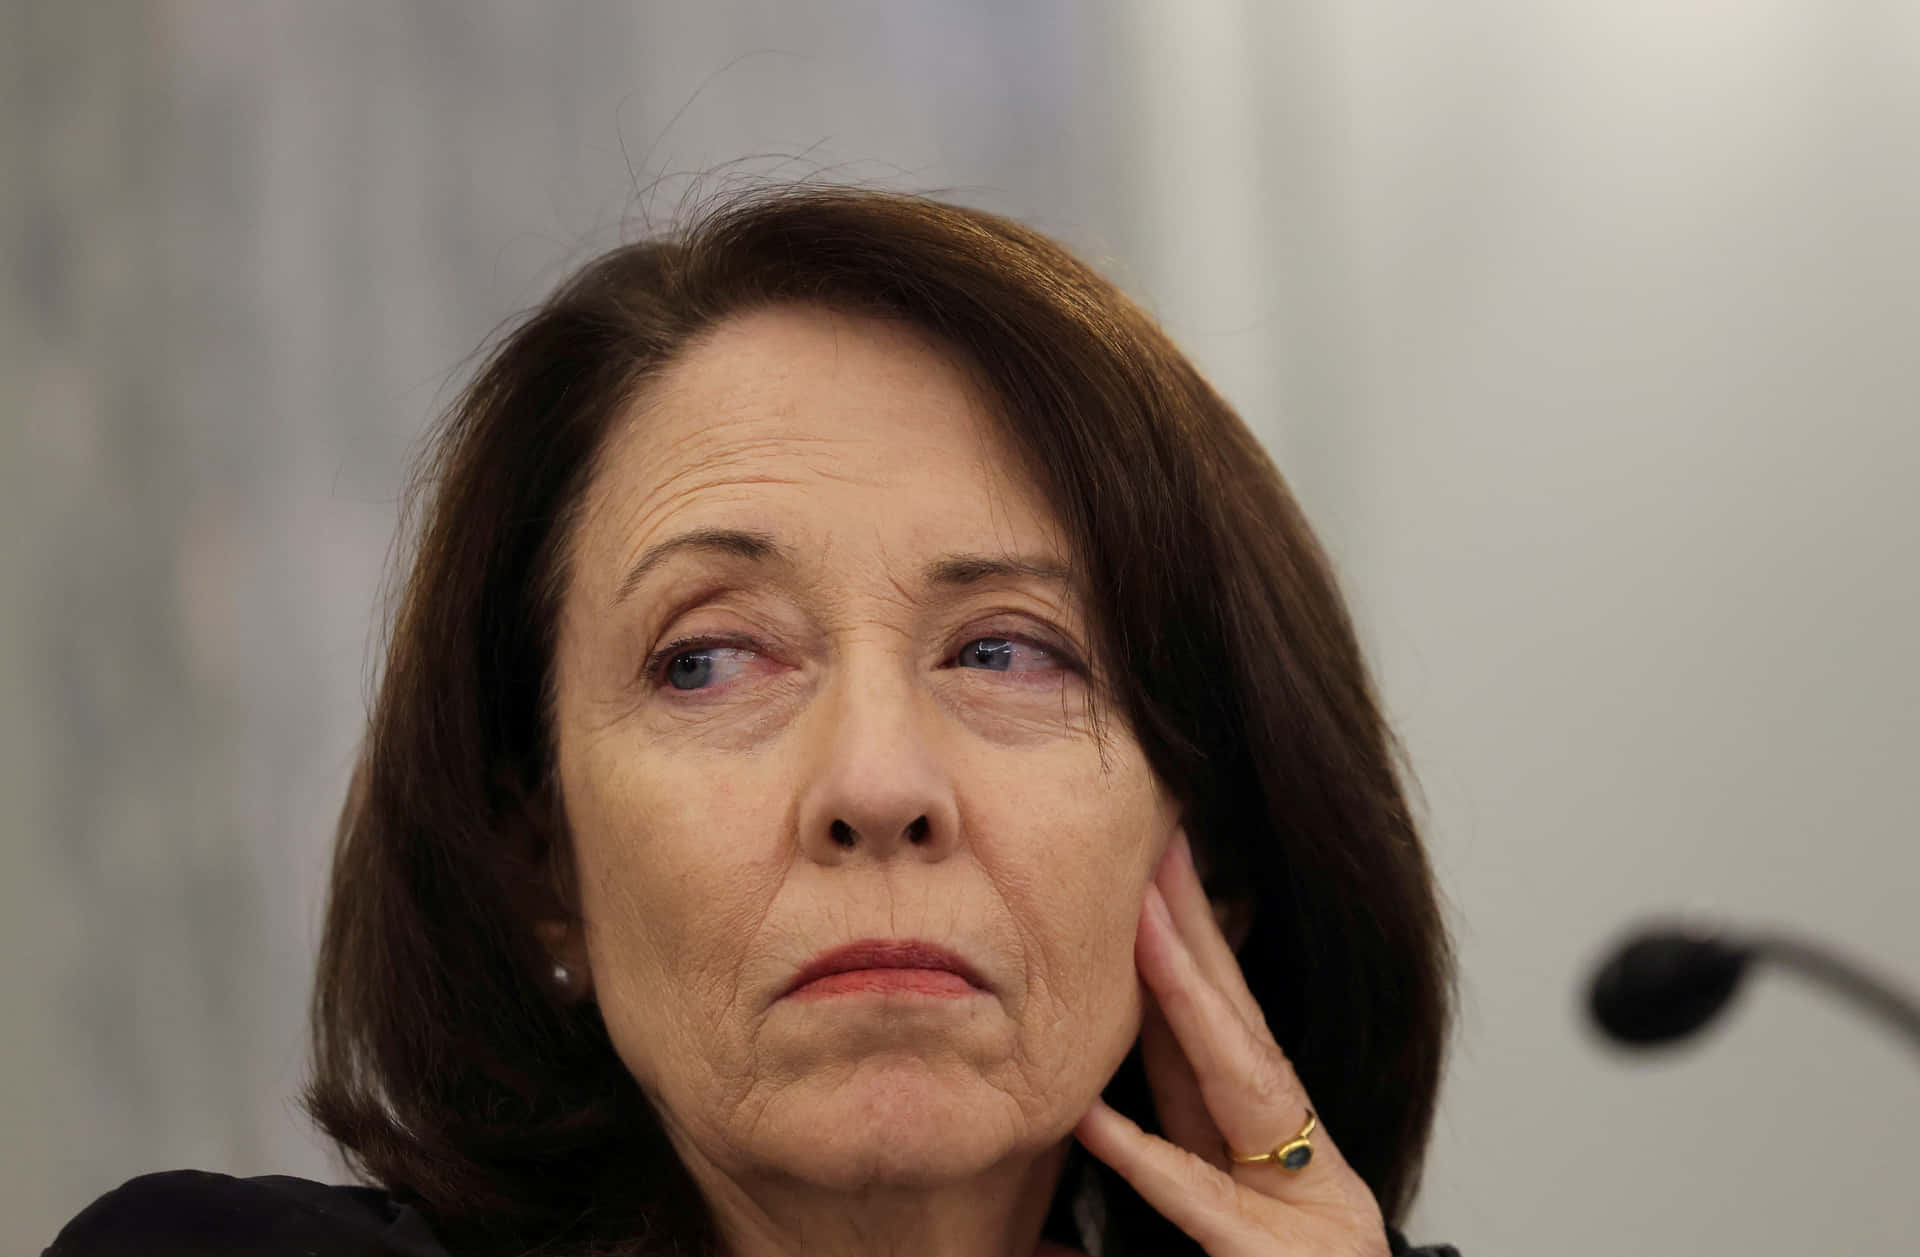 Maria Cantwell Side-eyeing Someone Wallpaper